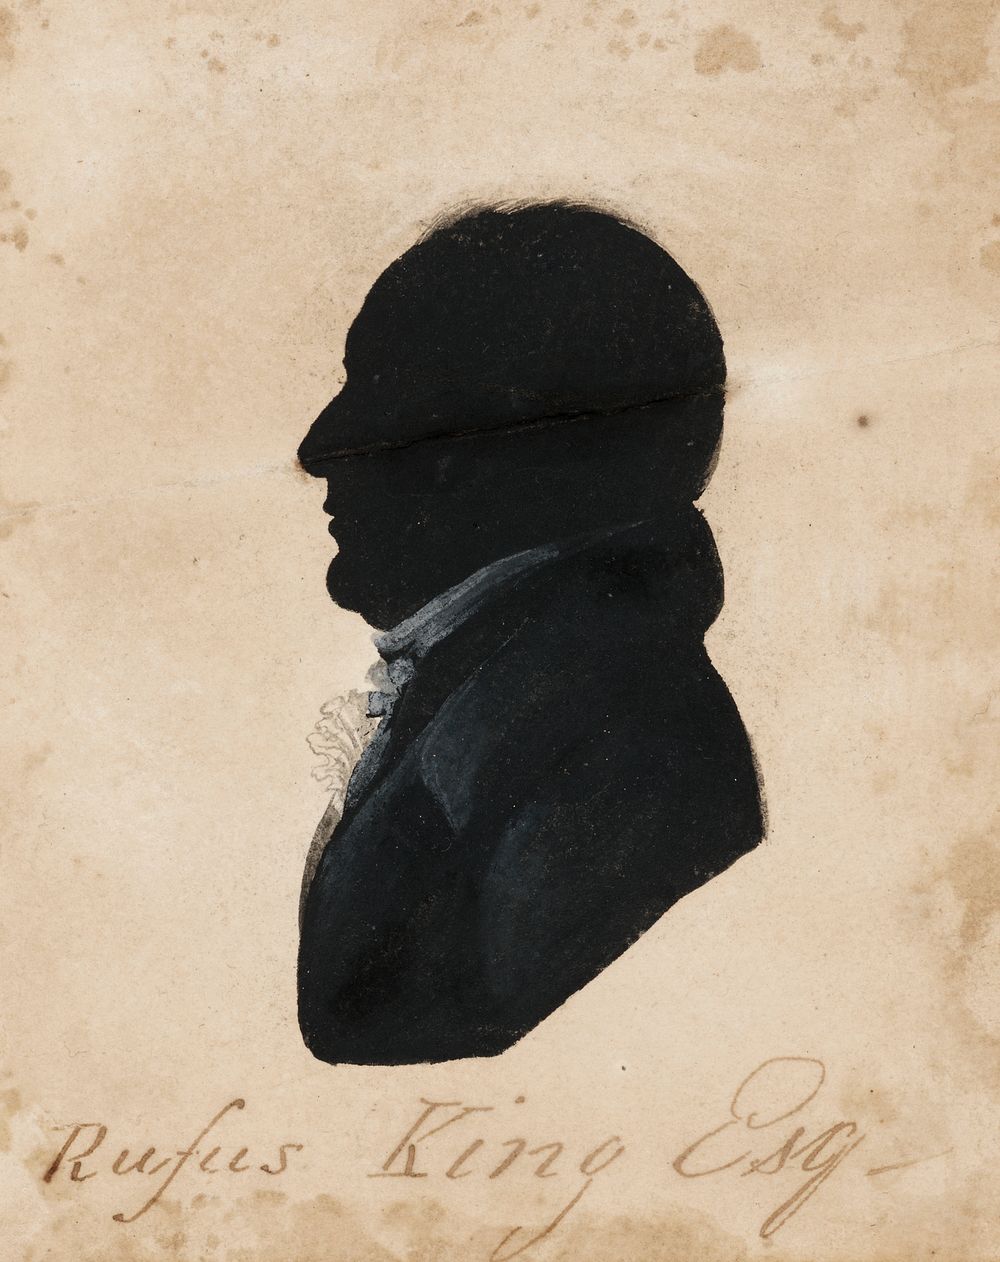 Rufus King by William Bache